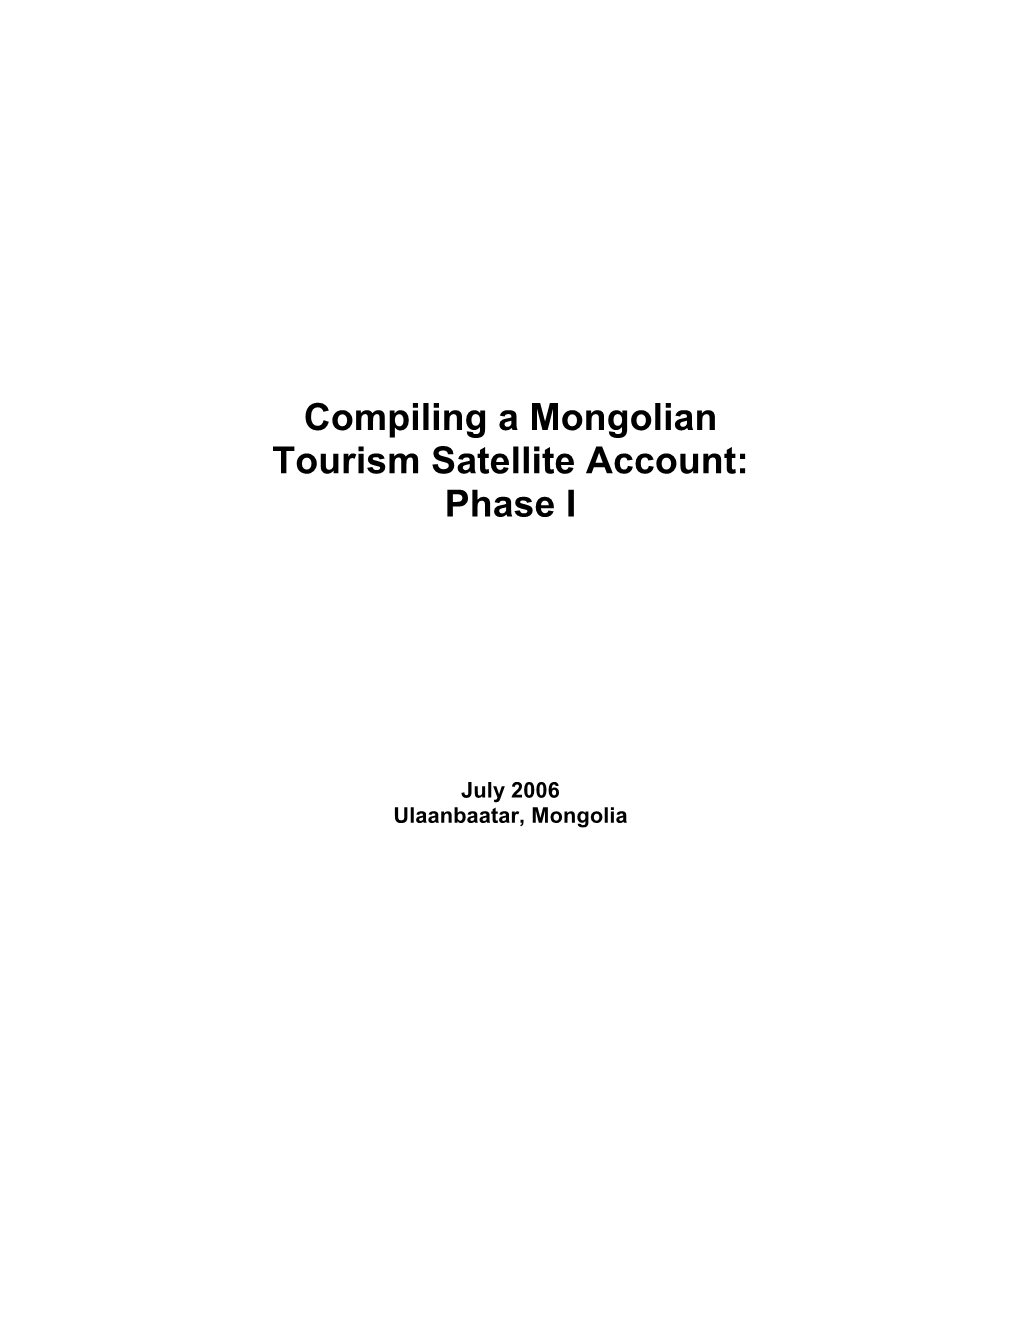 Compiling a Mongolian Tourism Satellite Account: Phase I